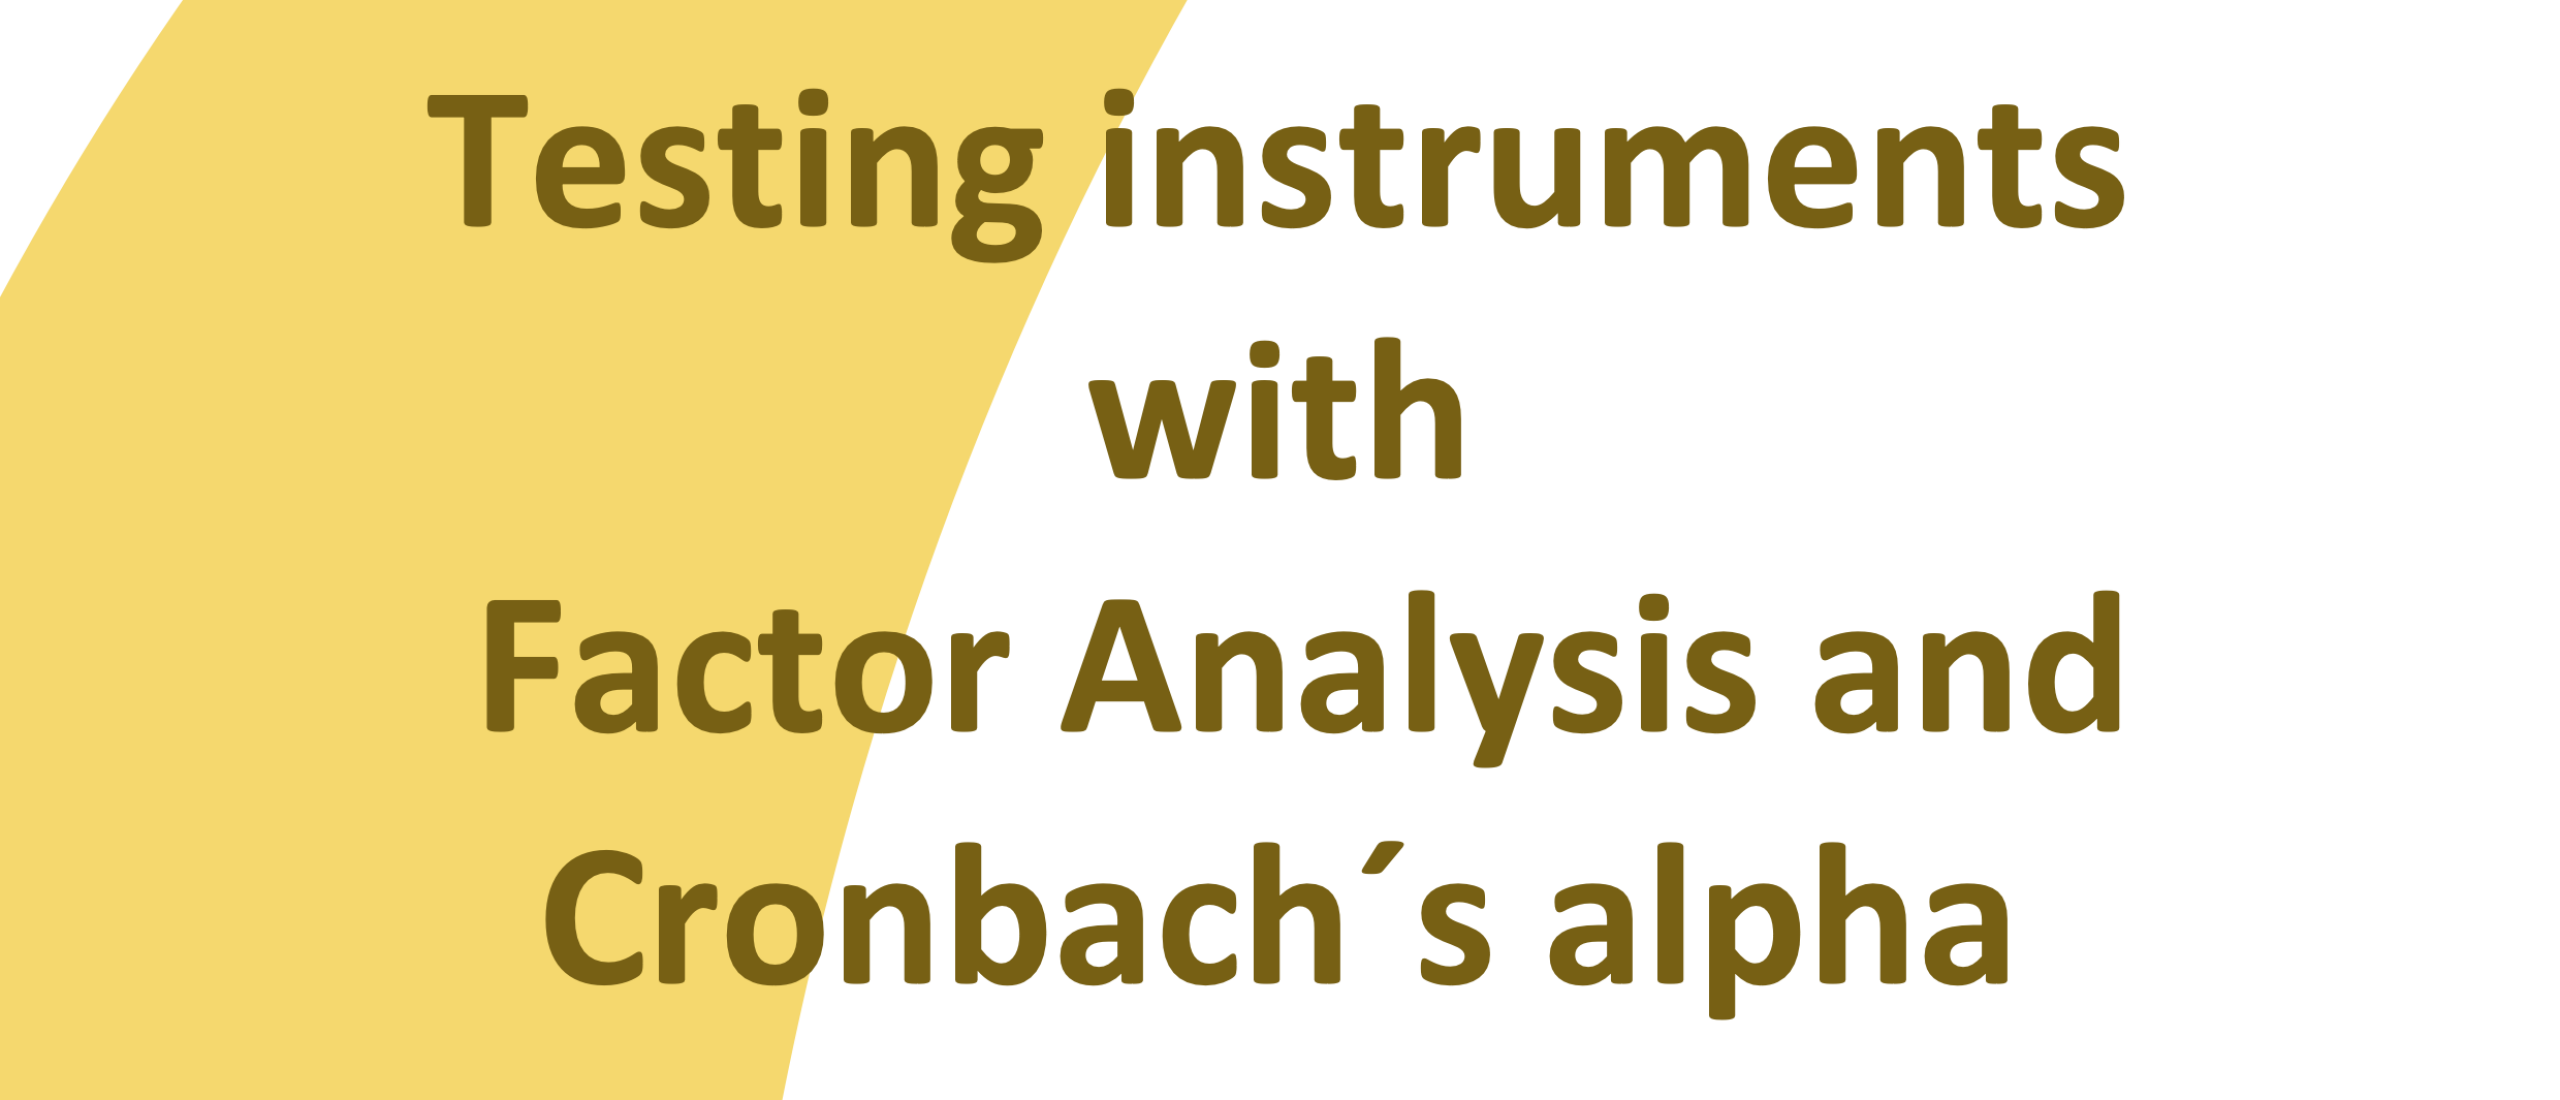 Testing instruments with factor analysis and Cronbachs alpha